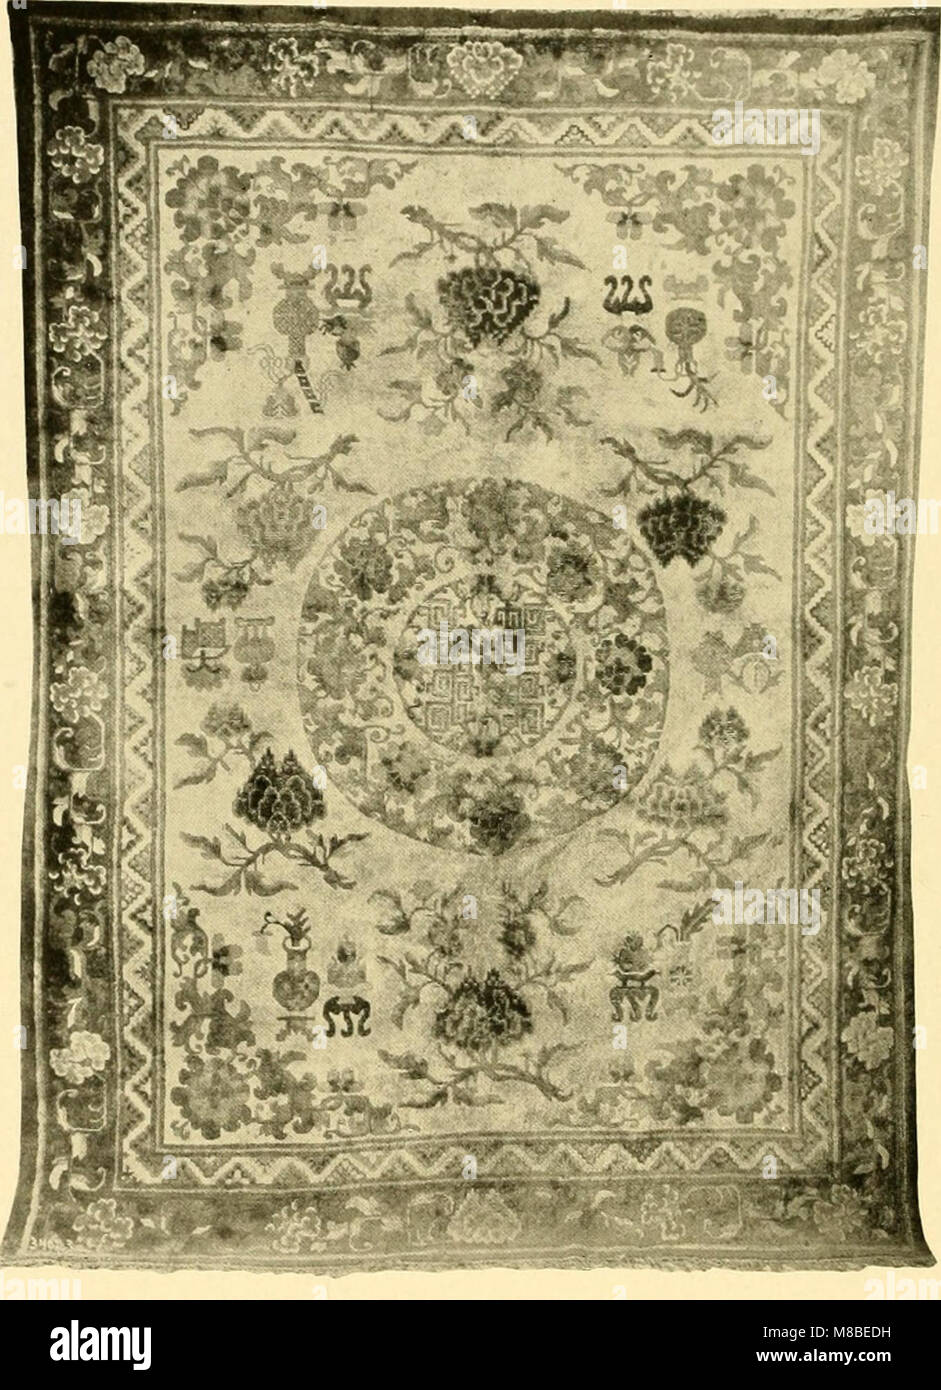 Decorative textiles; an illustrated book on coverings for furniture, walls and floors, including damasks, brocades and velvets, tapestries, laces, embroideries, chintzes, cretones, drapery and (14598143000) Stock Photo